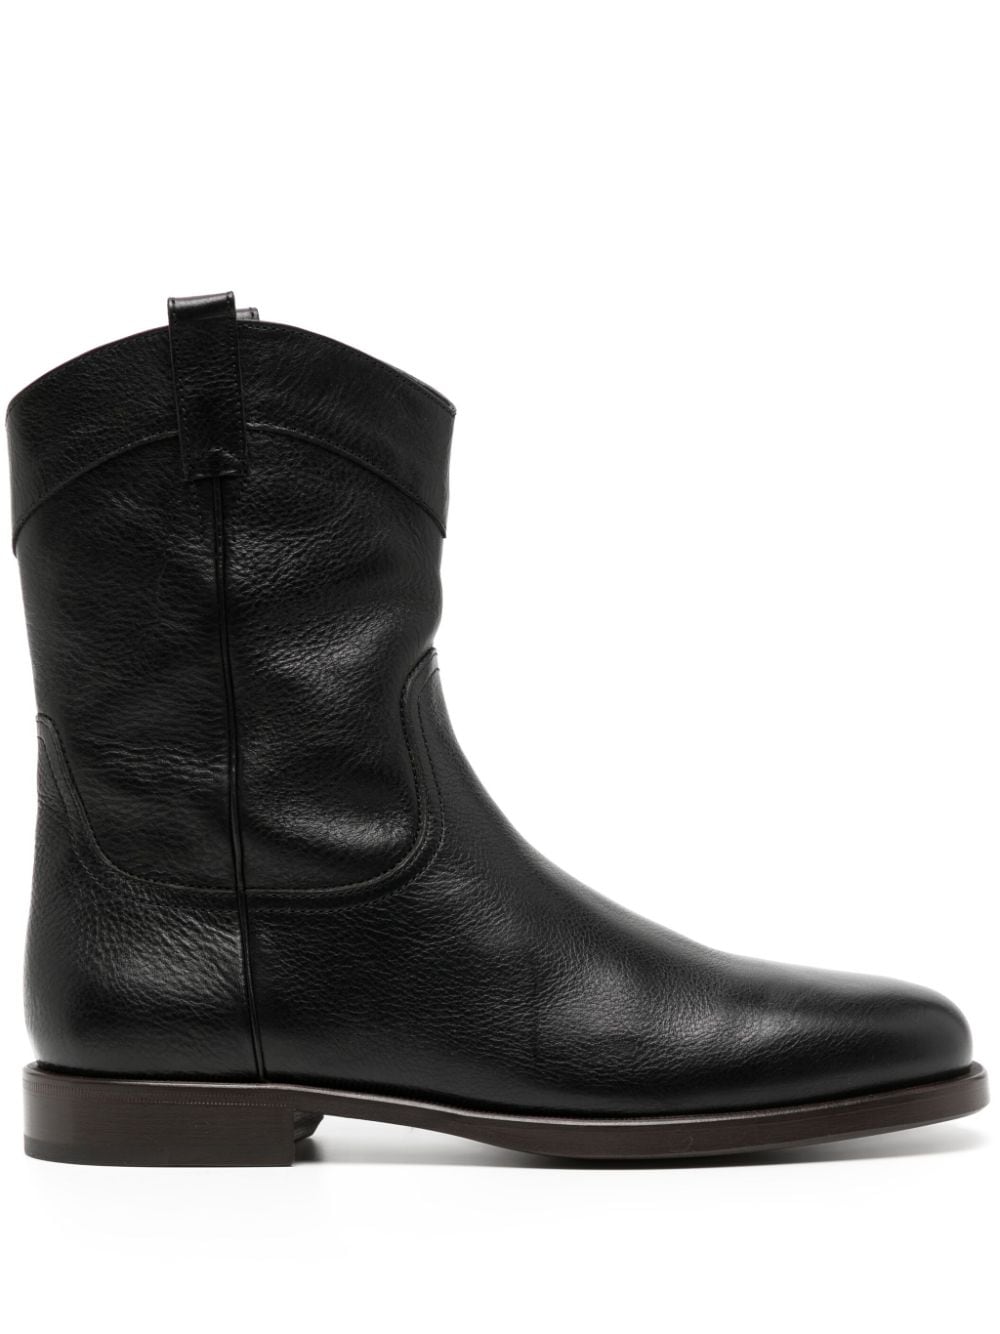 LEMAIRE Grained Ankle Boots - Farfetch